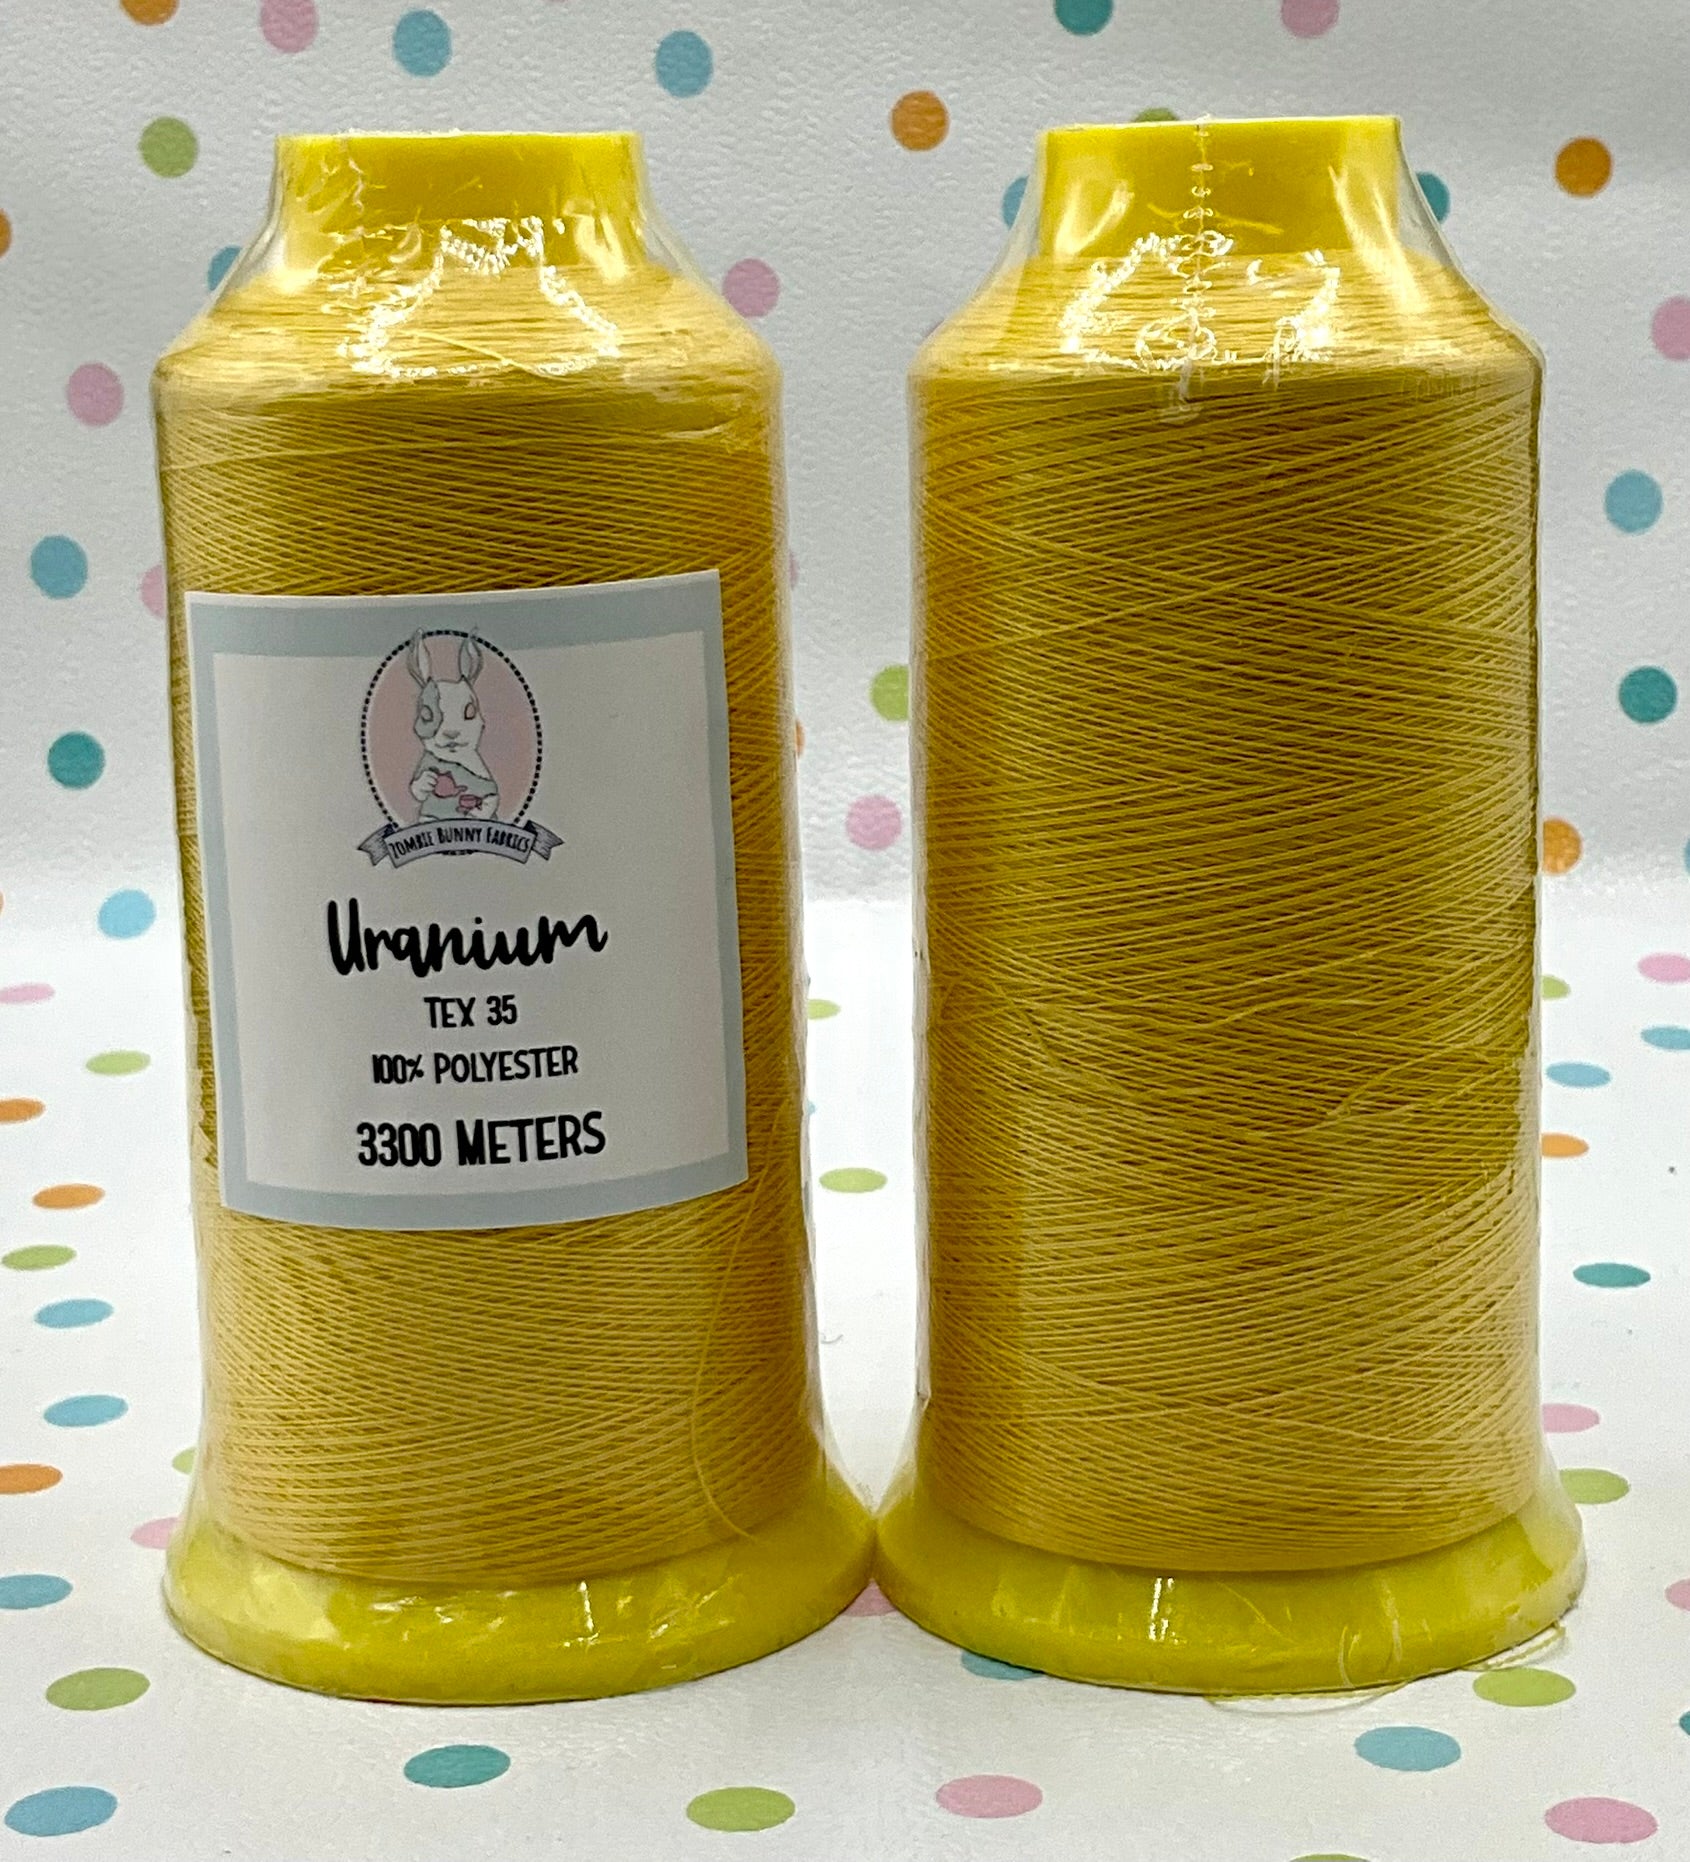 RETAIL THREAD Tex 35 Polyester Sewing Thread (3300 Meters) Glow in the Dark